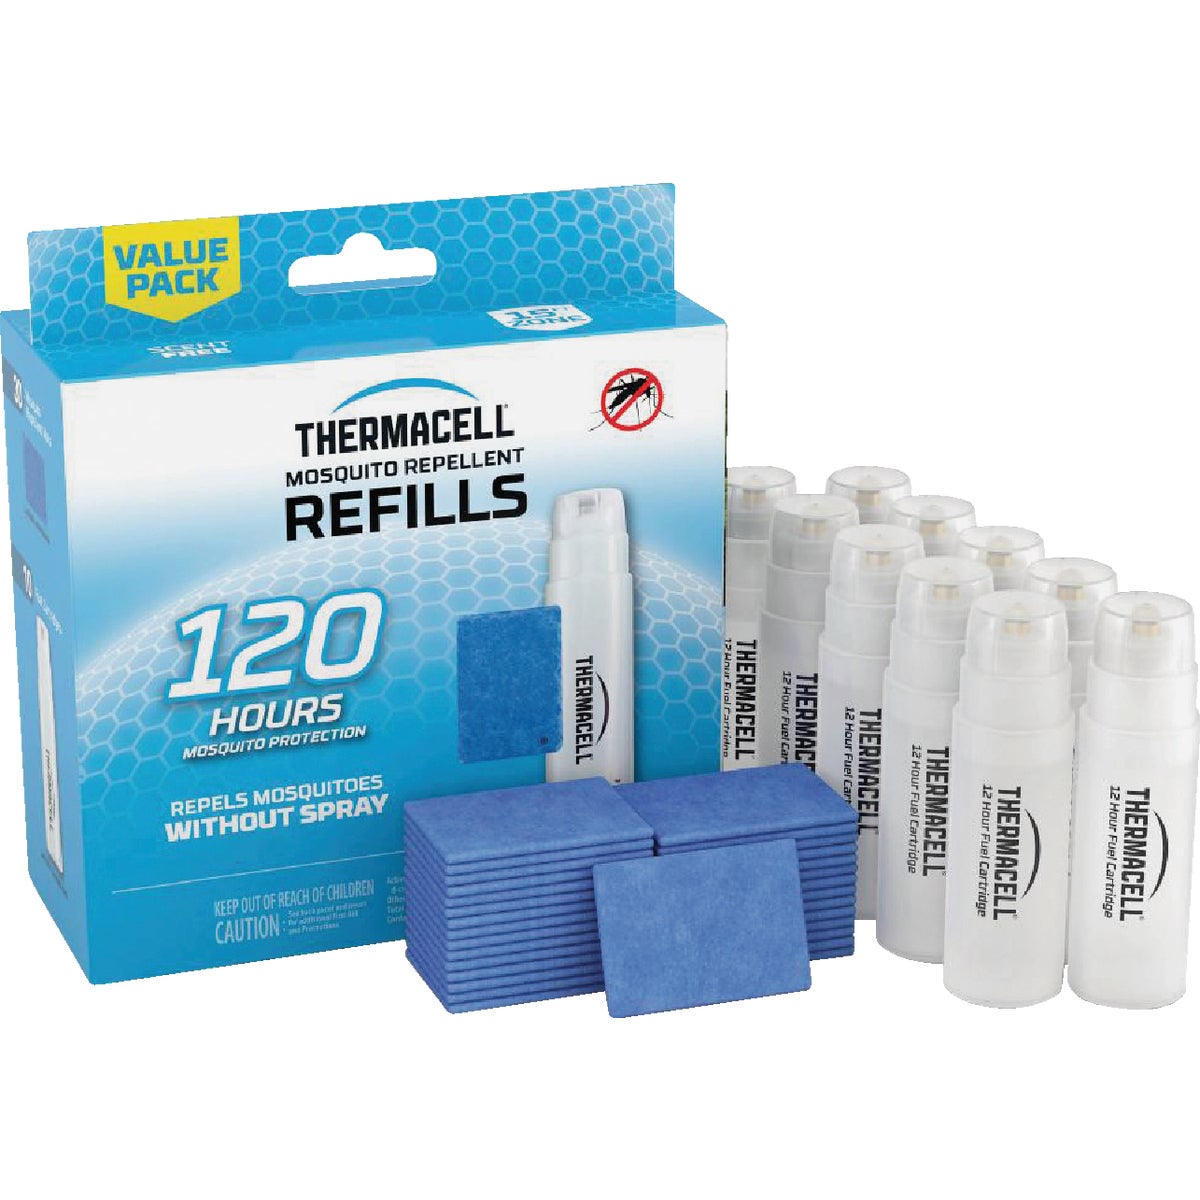 Thermacell 12 Hr. Mosquito Repellent Refill (10-Pack)